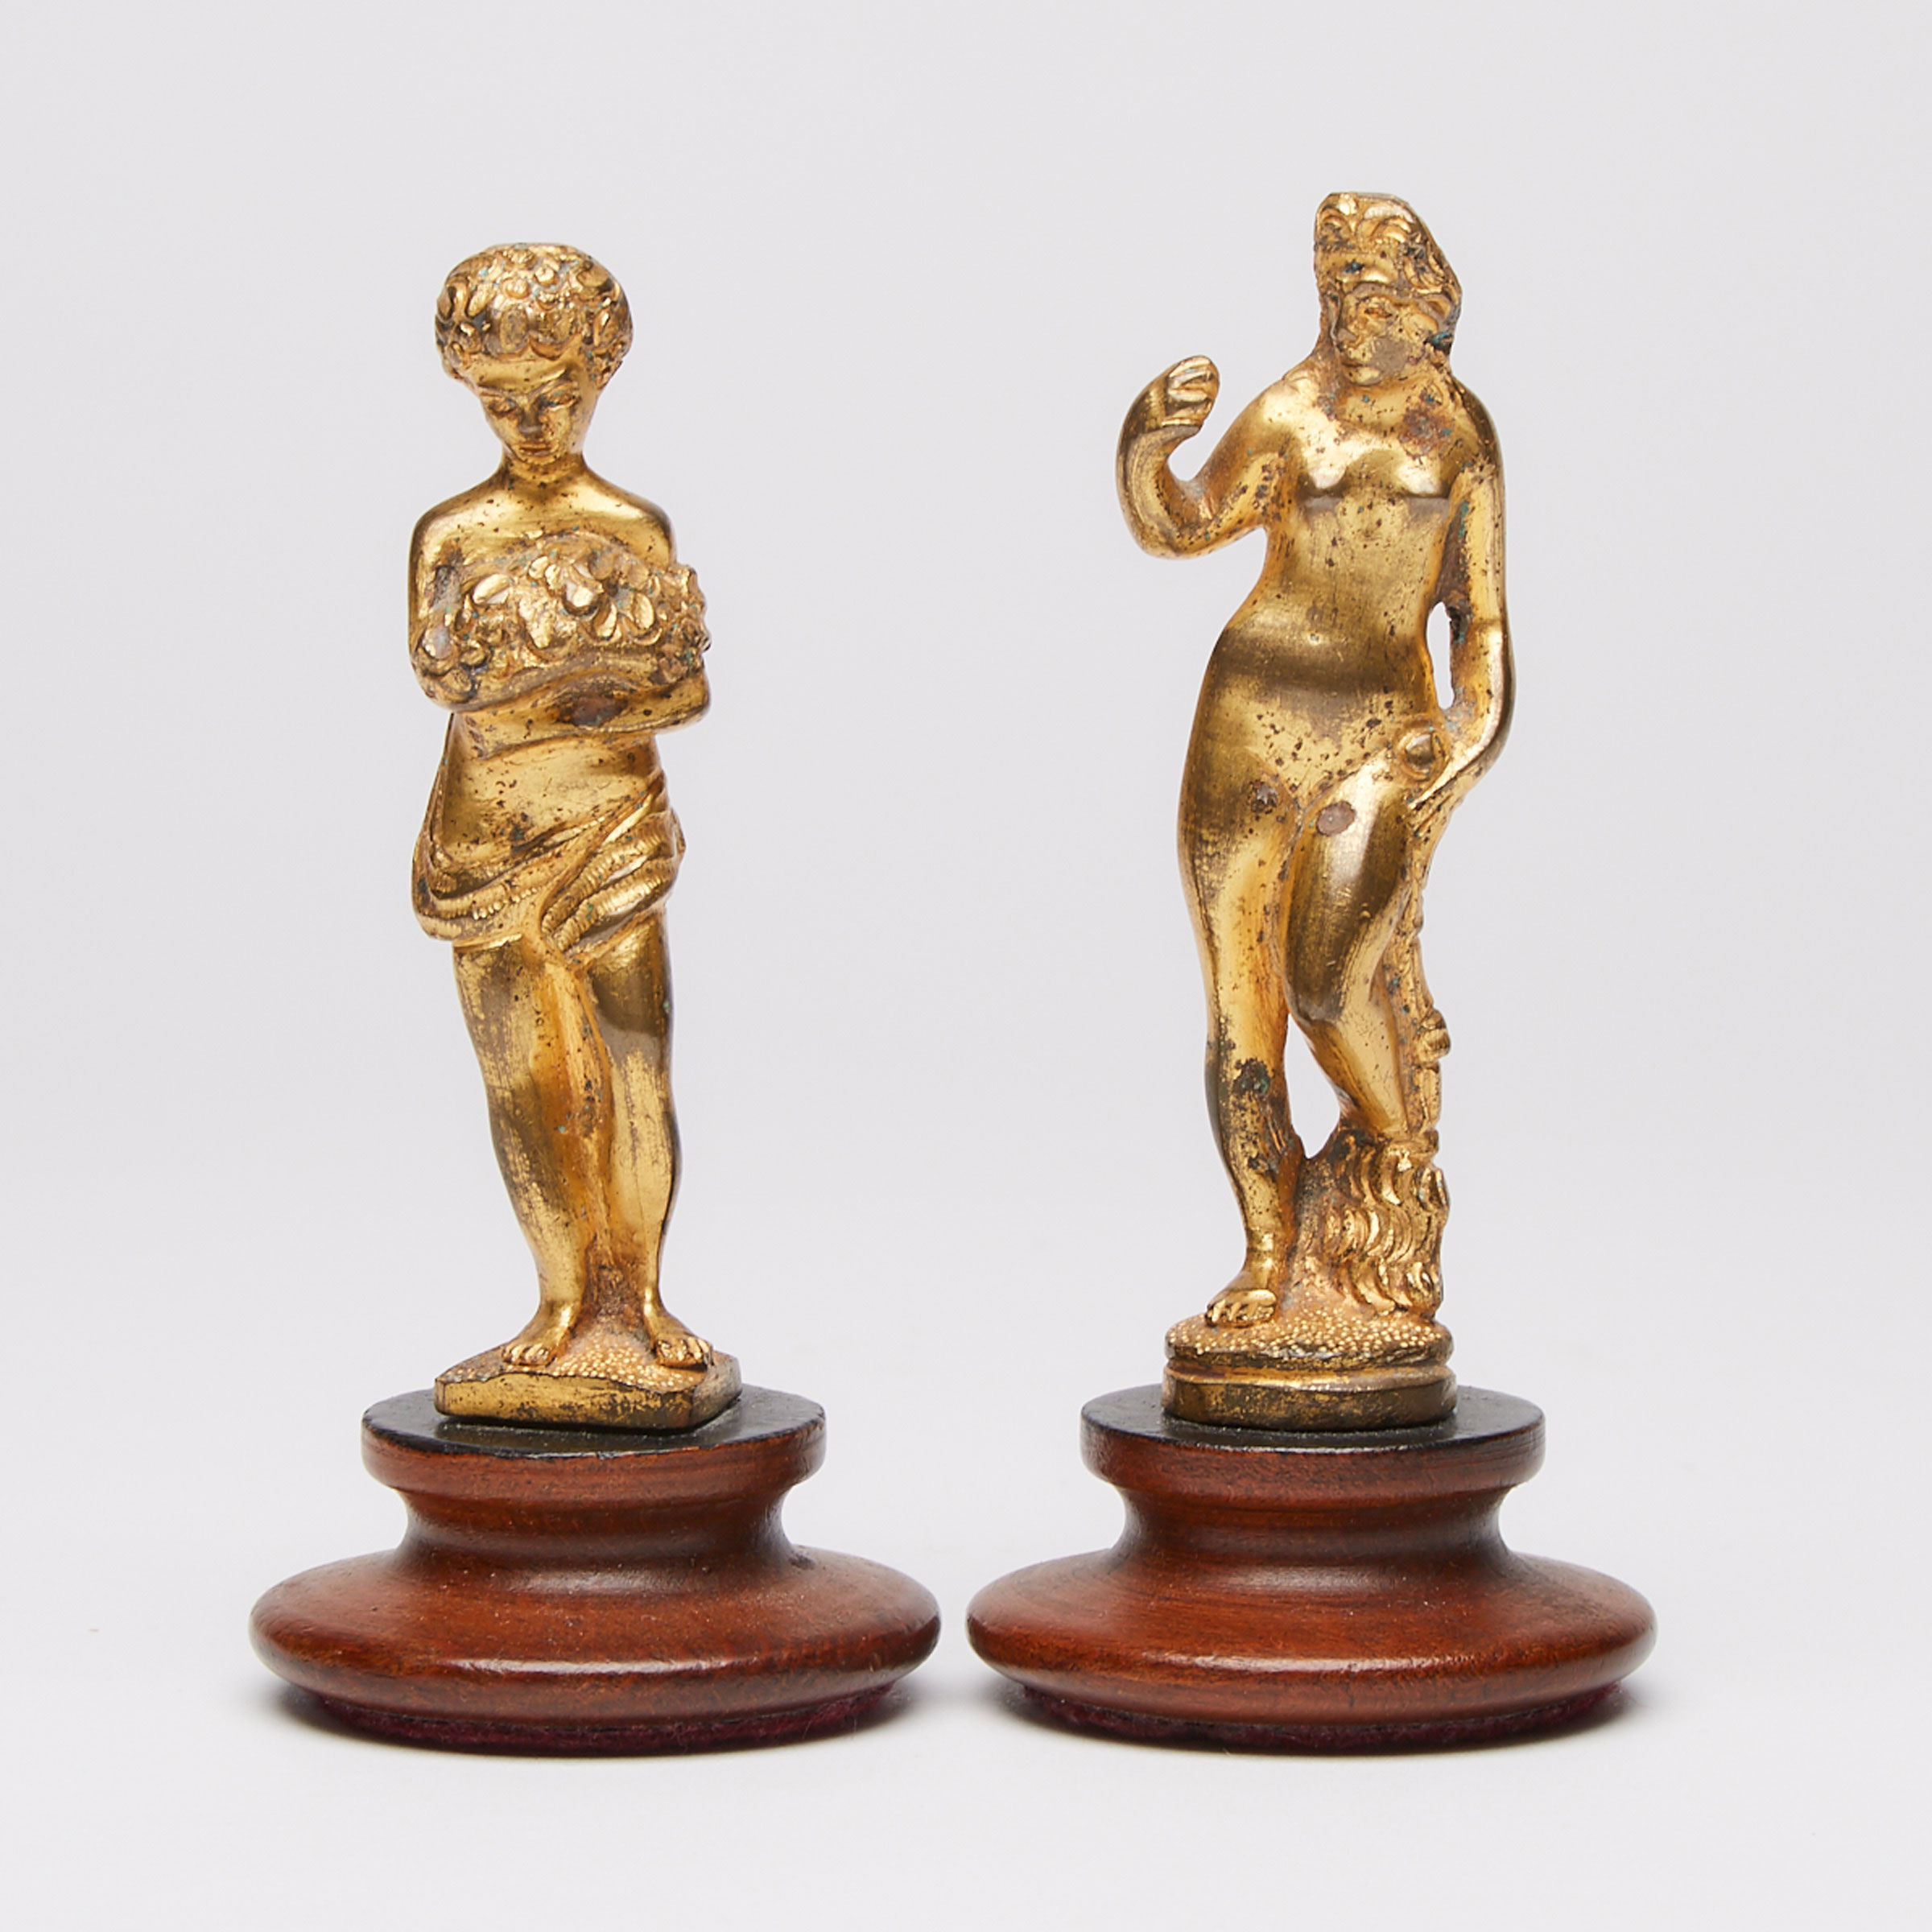 Two North Italian Gilt Bronze Figures, early 16th century